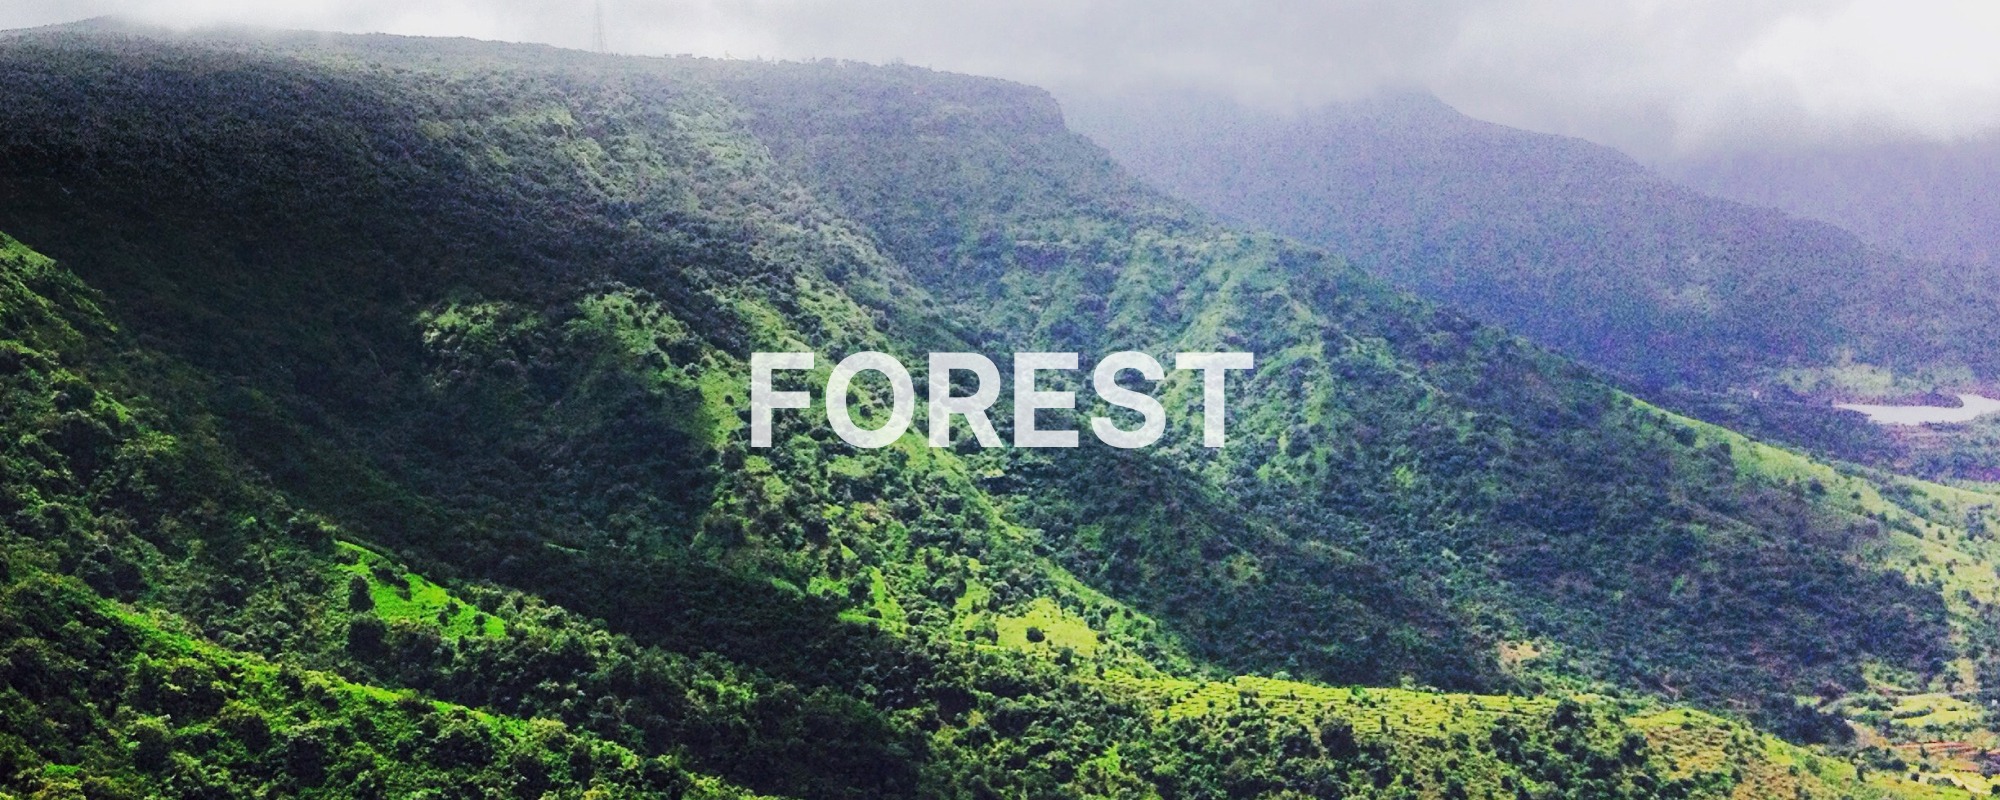 Reserve Forests 